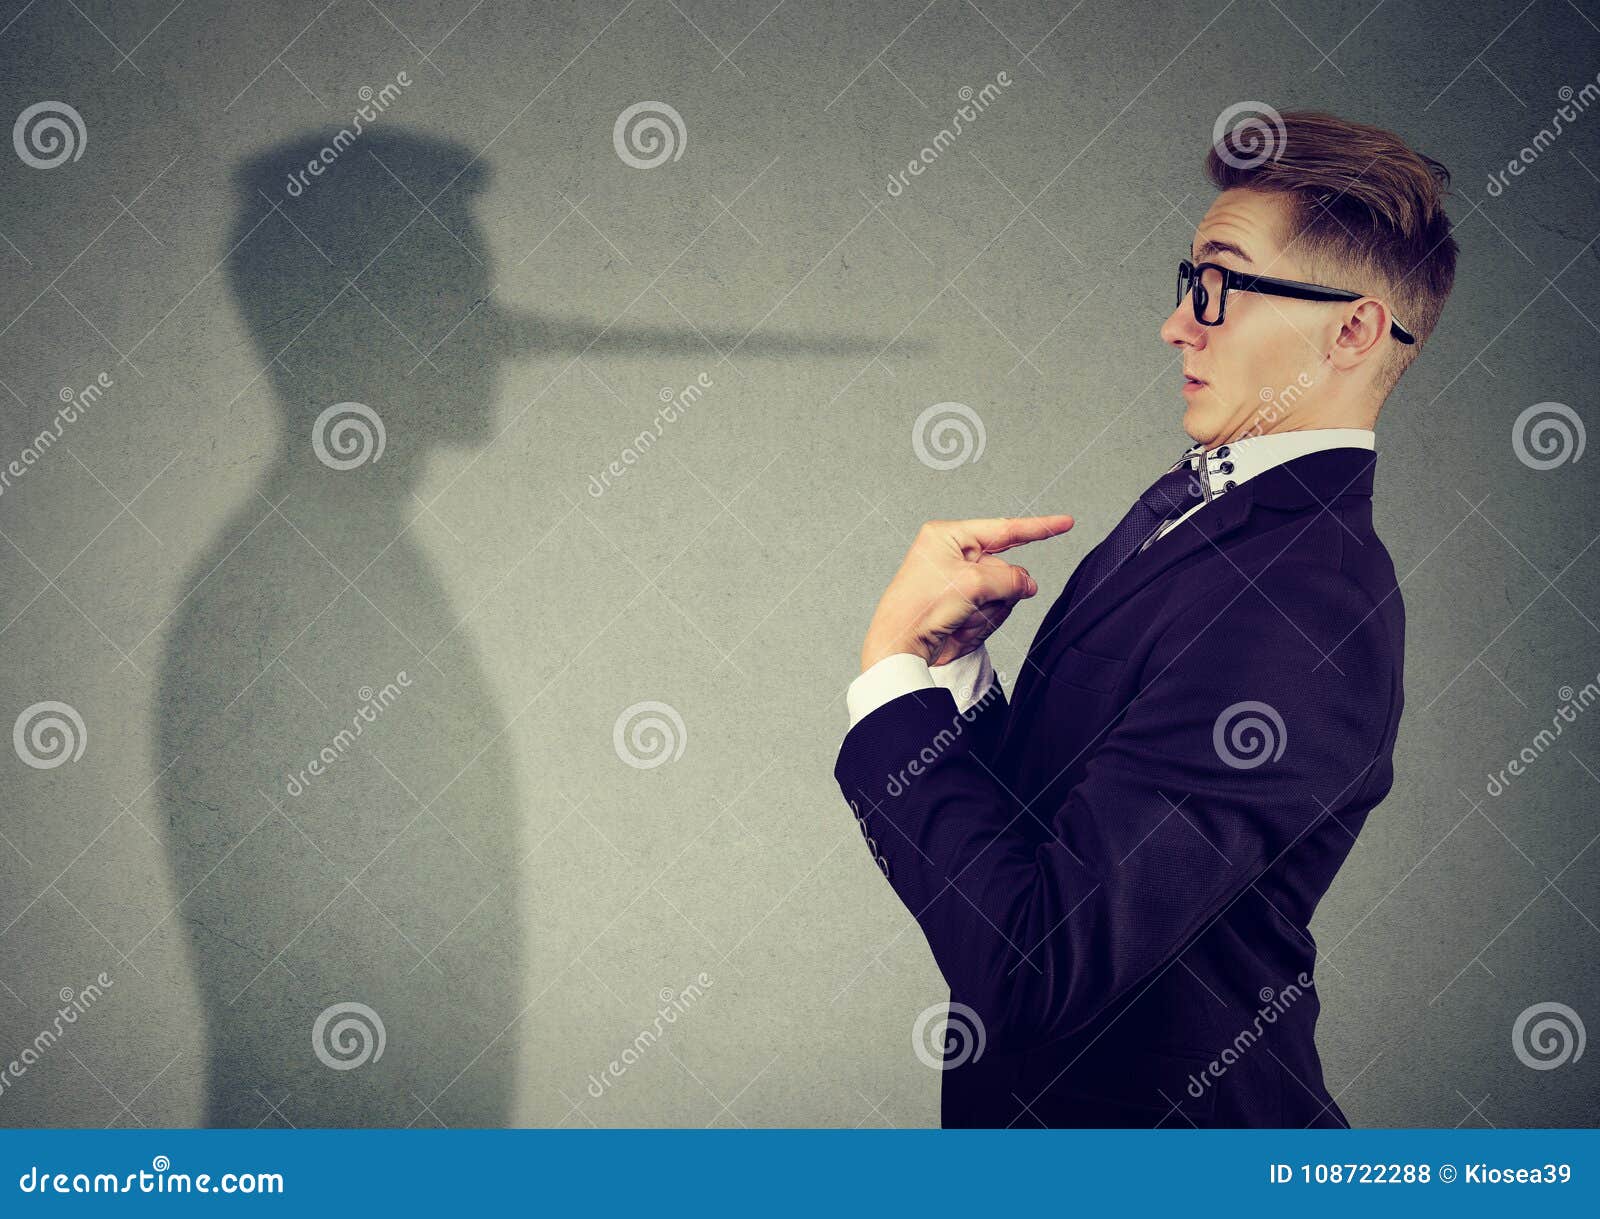 man pointing at himself while lying